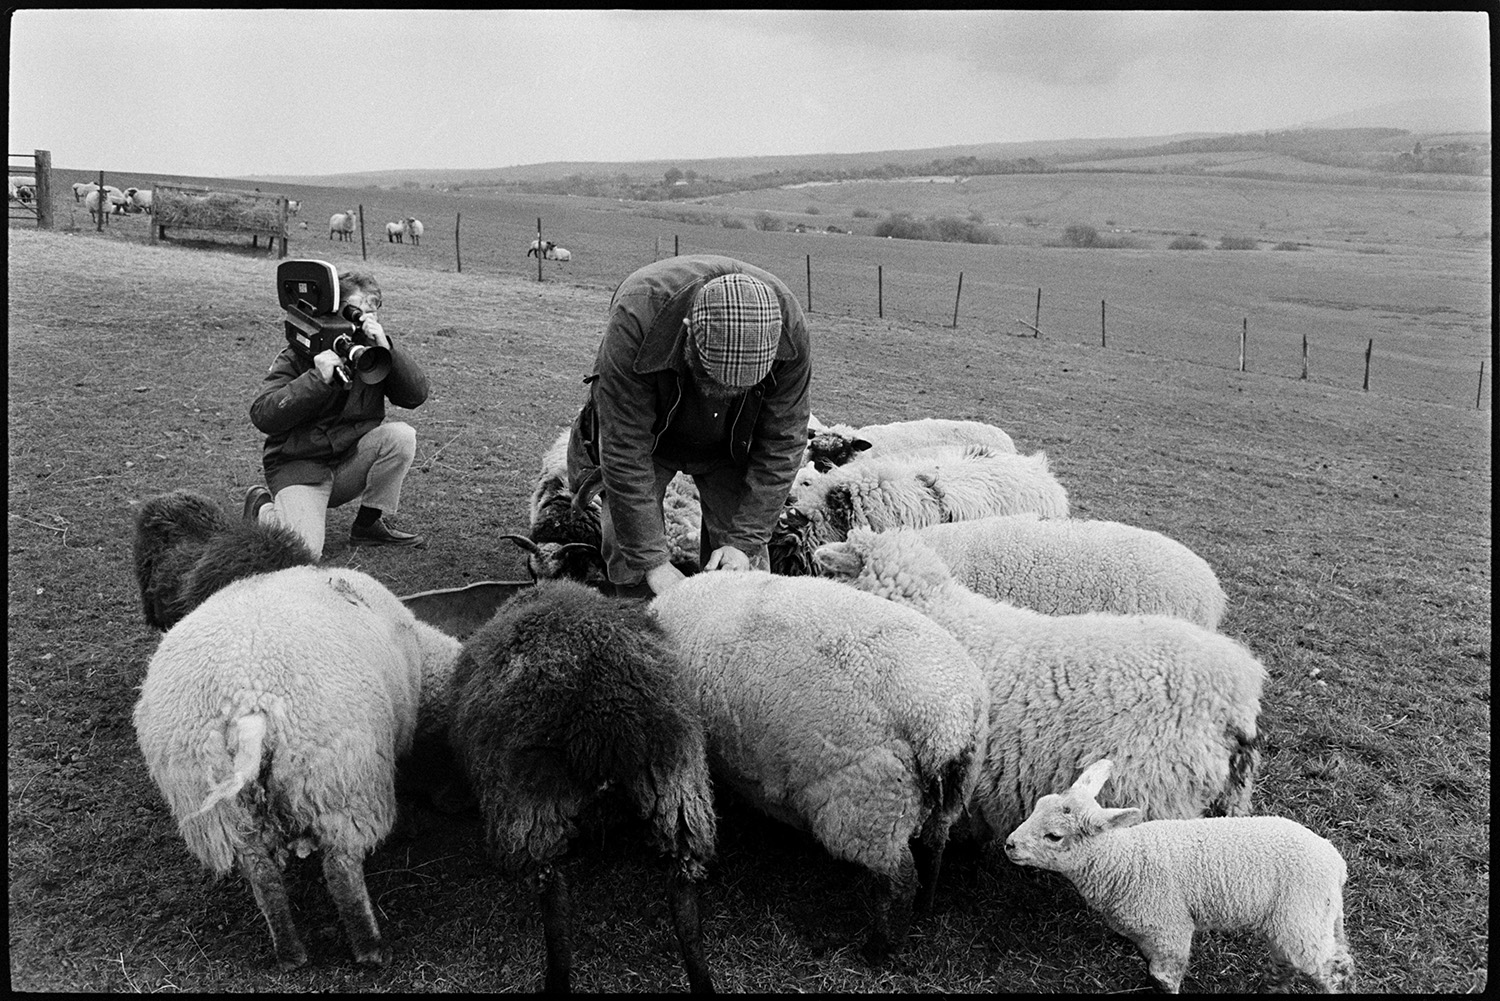 Television crew filming the photographer working on moor.
[Malcolm Baldwin filming a farmer feeding sheep in a field at Hatherleigh Moor. Views of field and hills can be seen in the distance.]